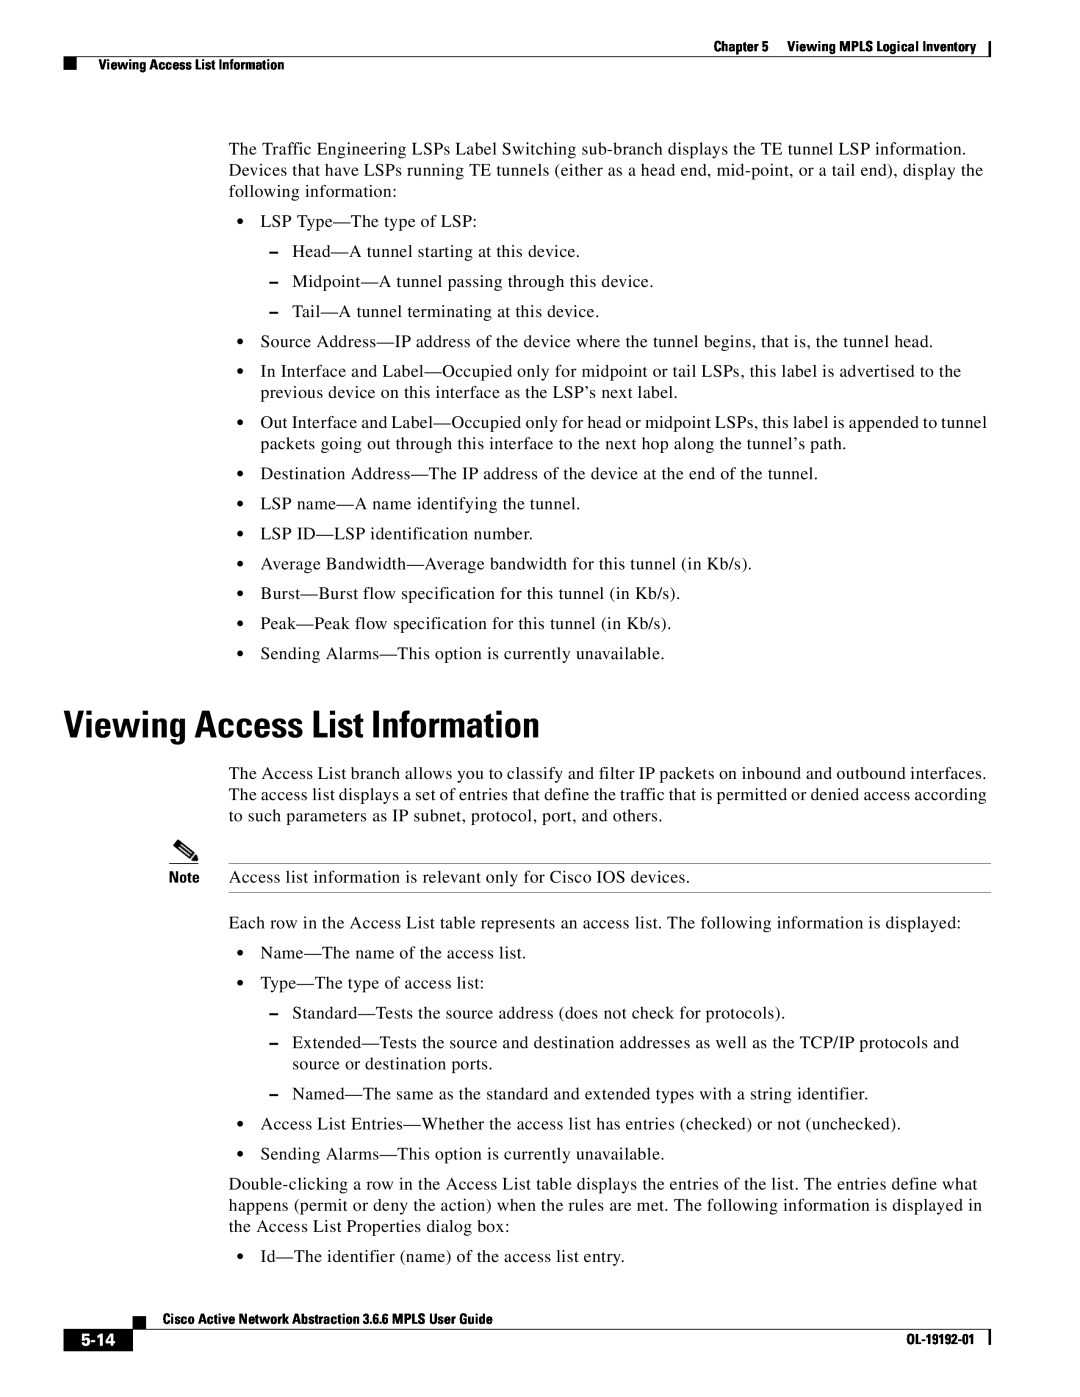 Cisco Systems 3.6.6 manual Viewing Access List Information, 5-14 